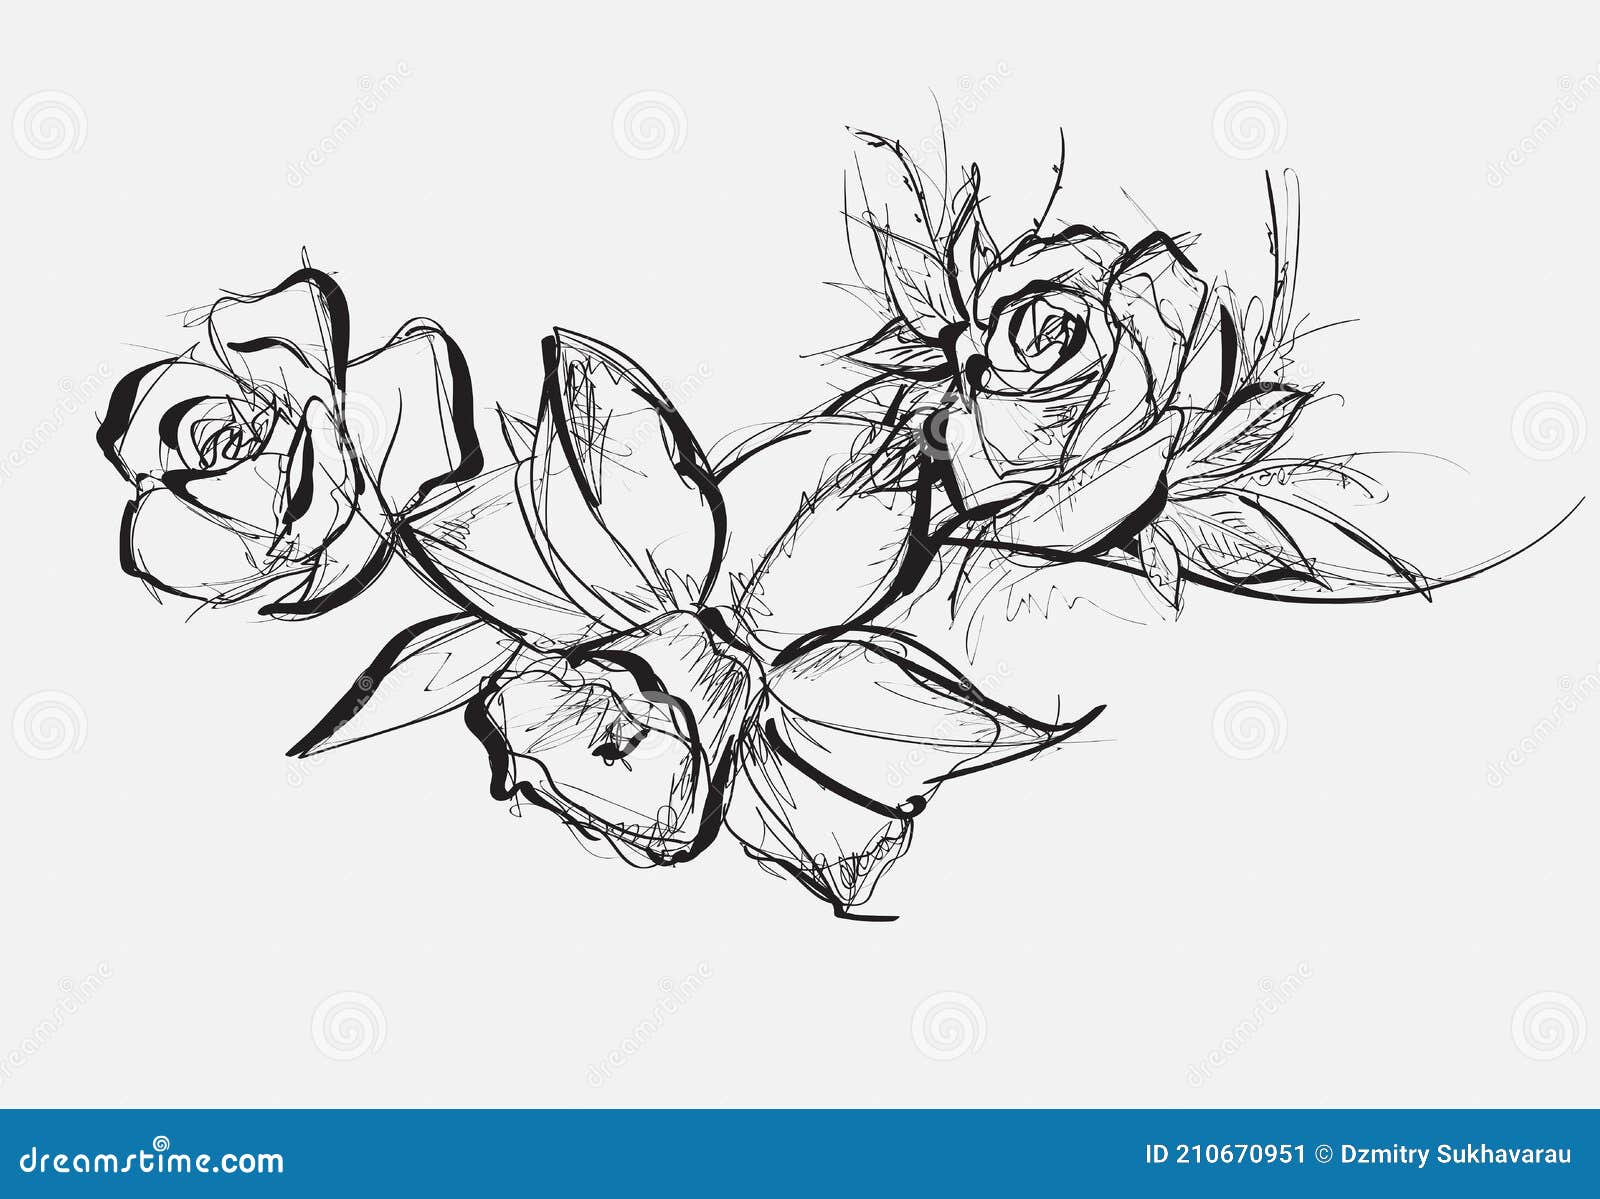 How to Draw Rose Flower Sketch frompencil  YouTube